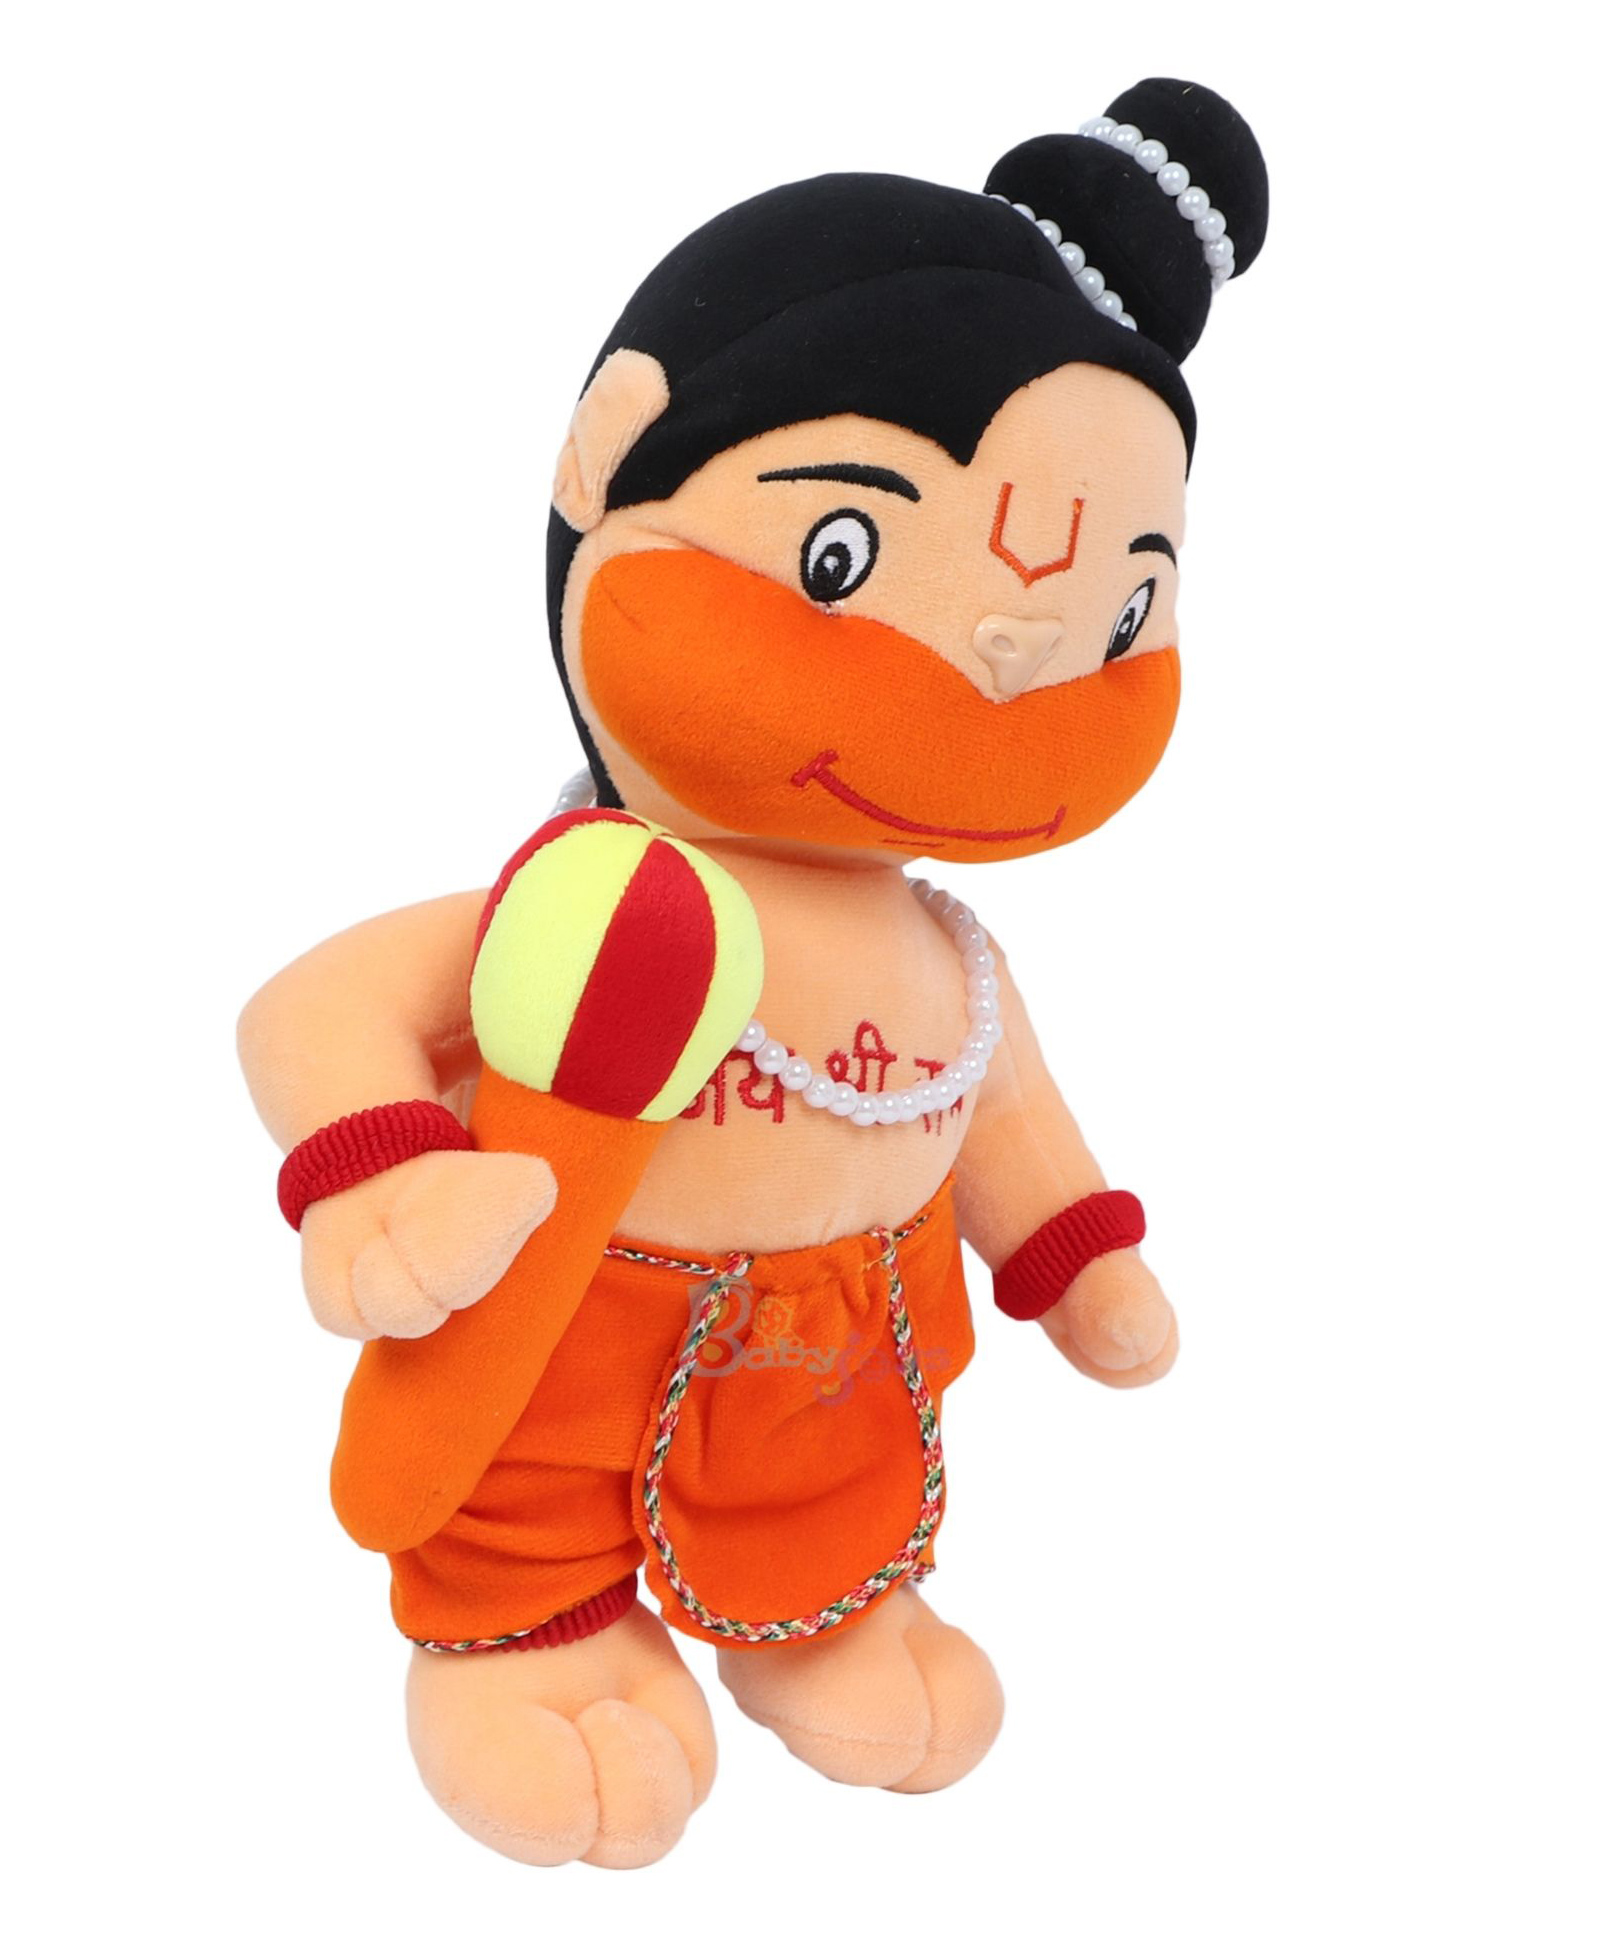 BABYJOYS Lord Hanuman Stuffed Soft Toy Orange - Height 53 cm Online India,  Buy Soft Toys for (12 Months-8 Years) at  - 10658309